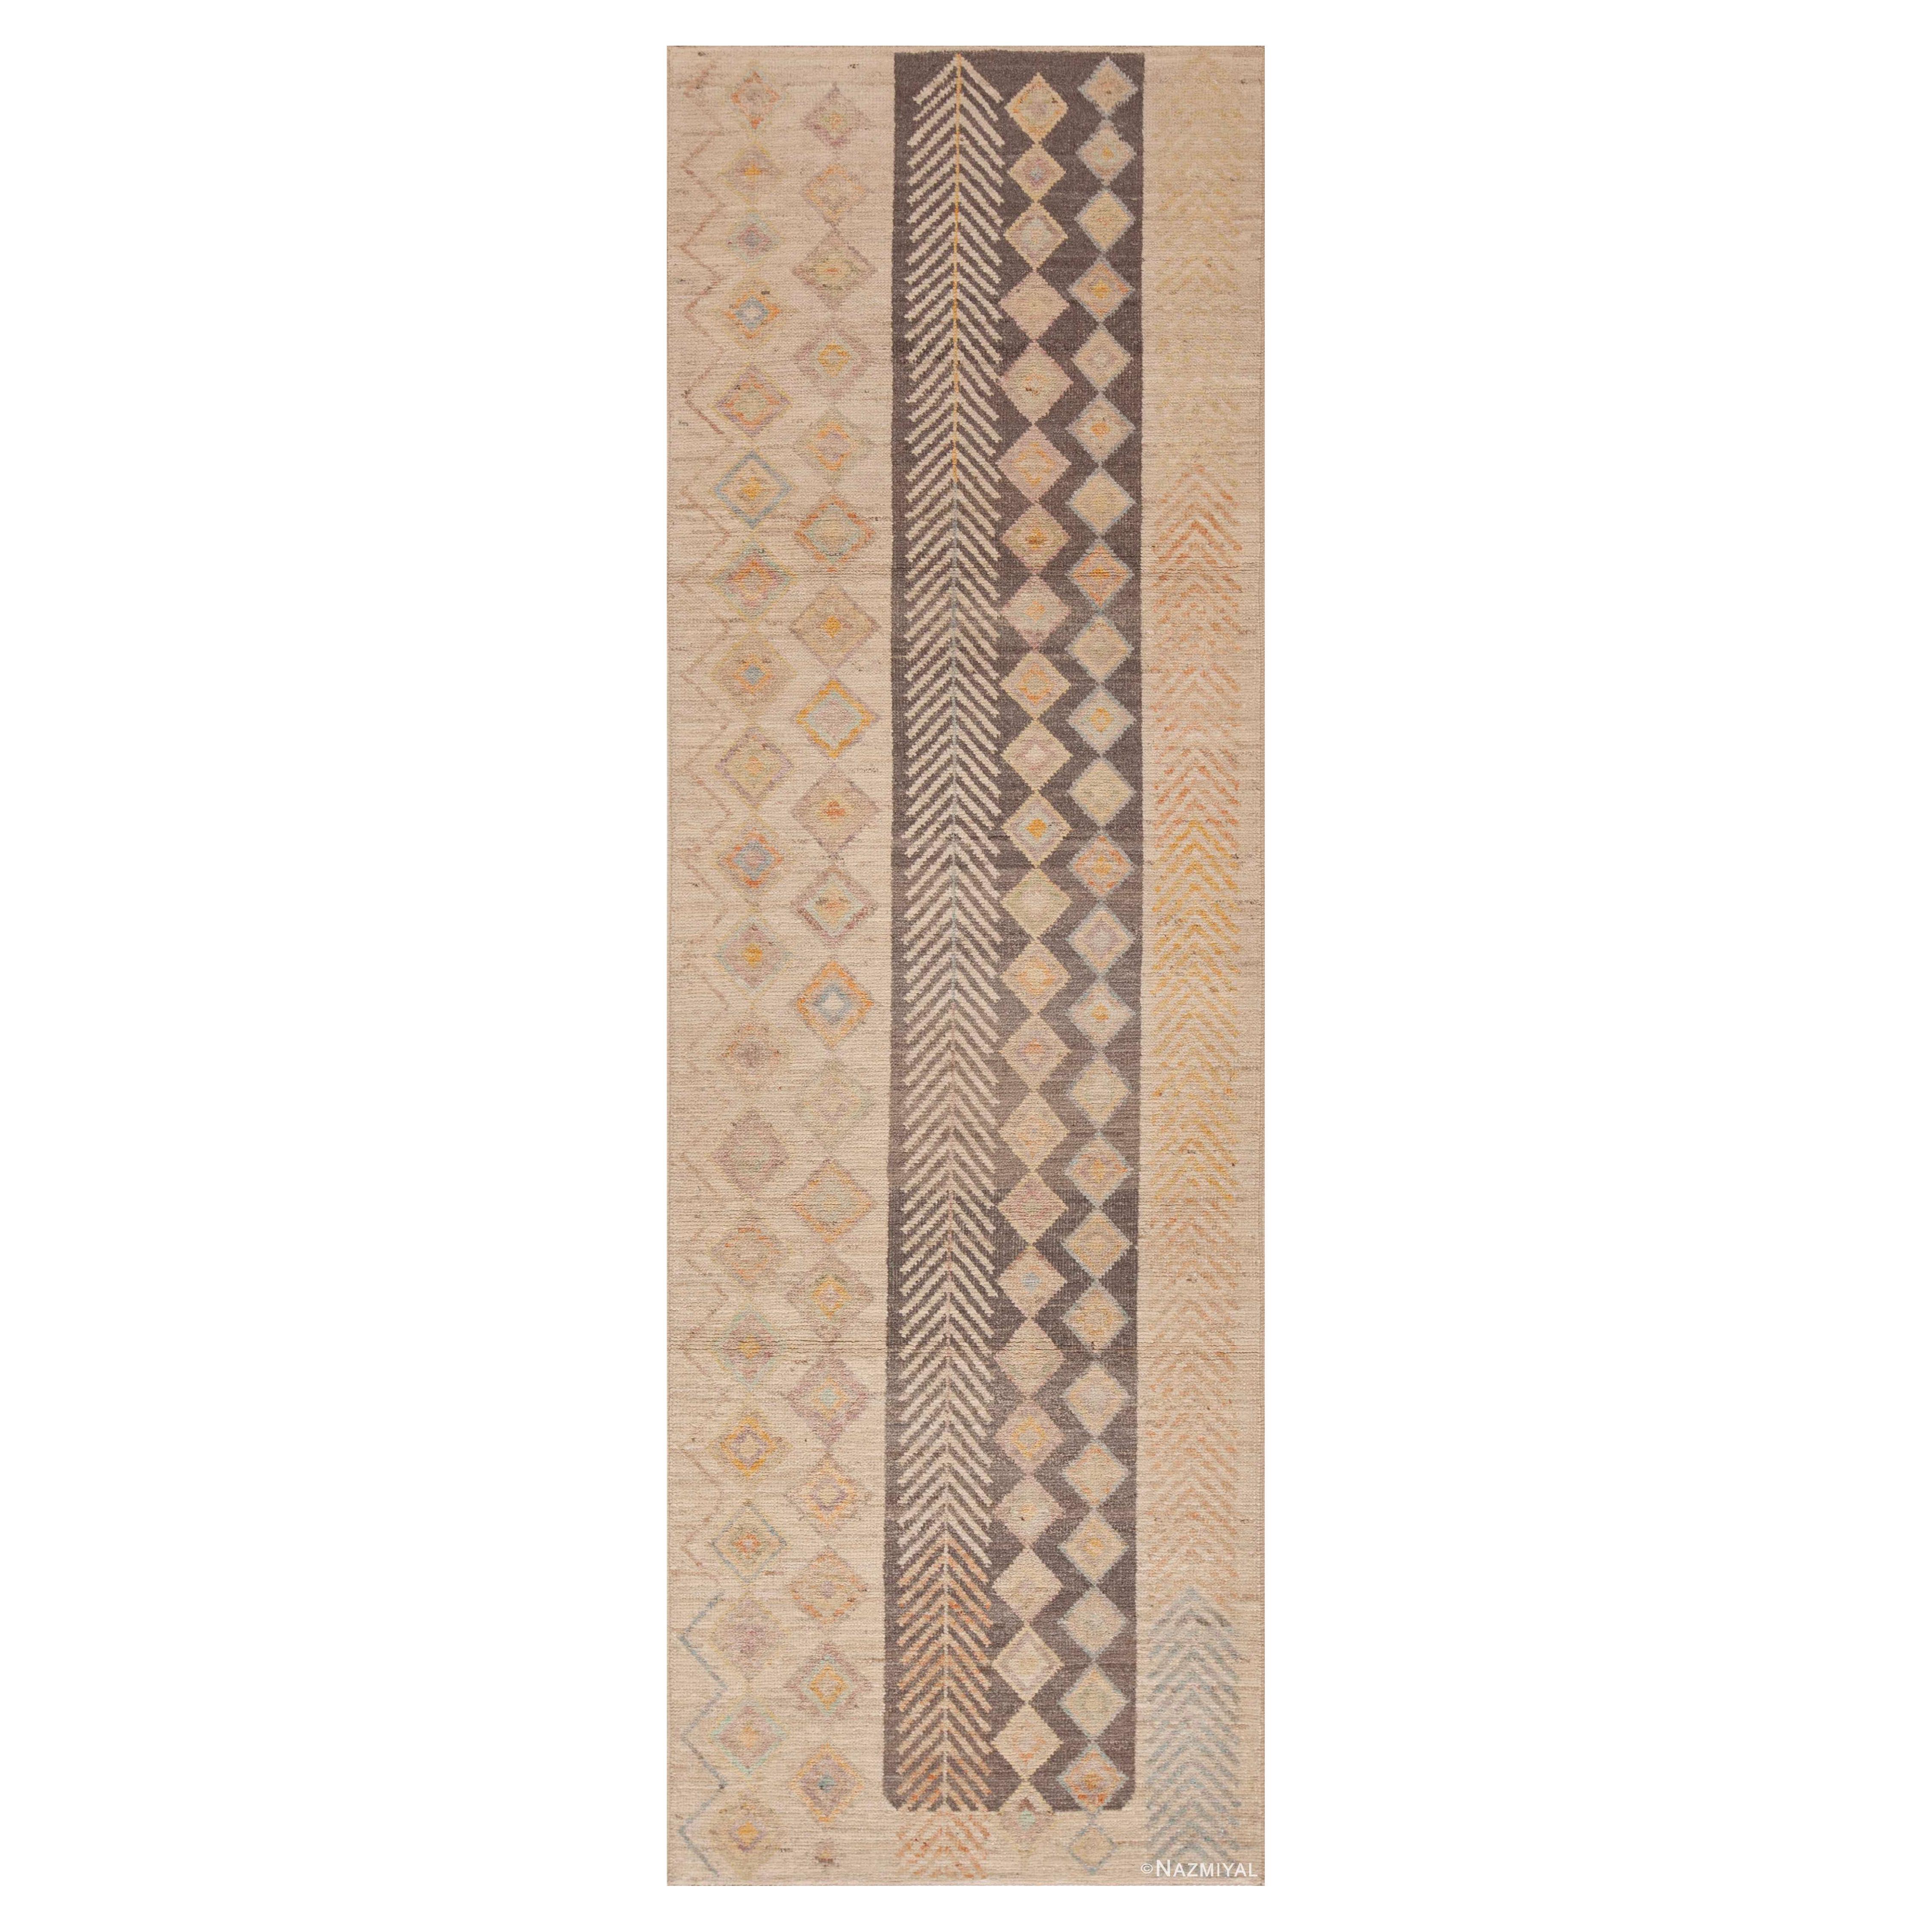 Nazmiyal Collection Tribal Modern Contemporary Hallway Runner Rug 3' x 9'9" For Sale